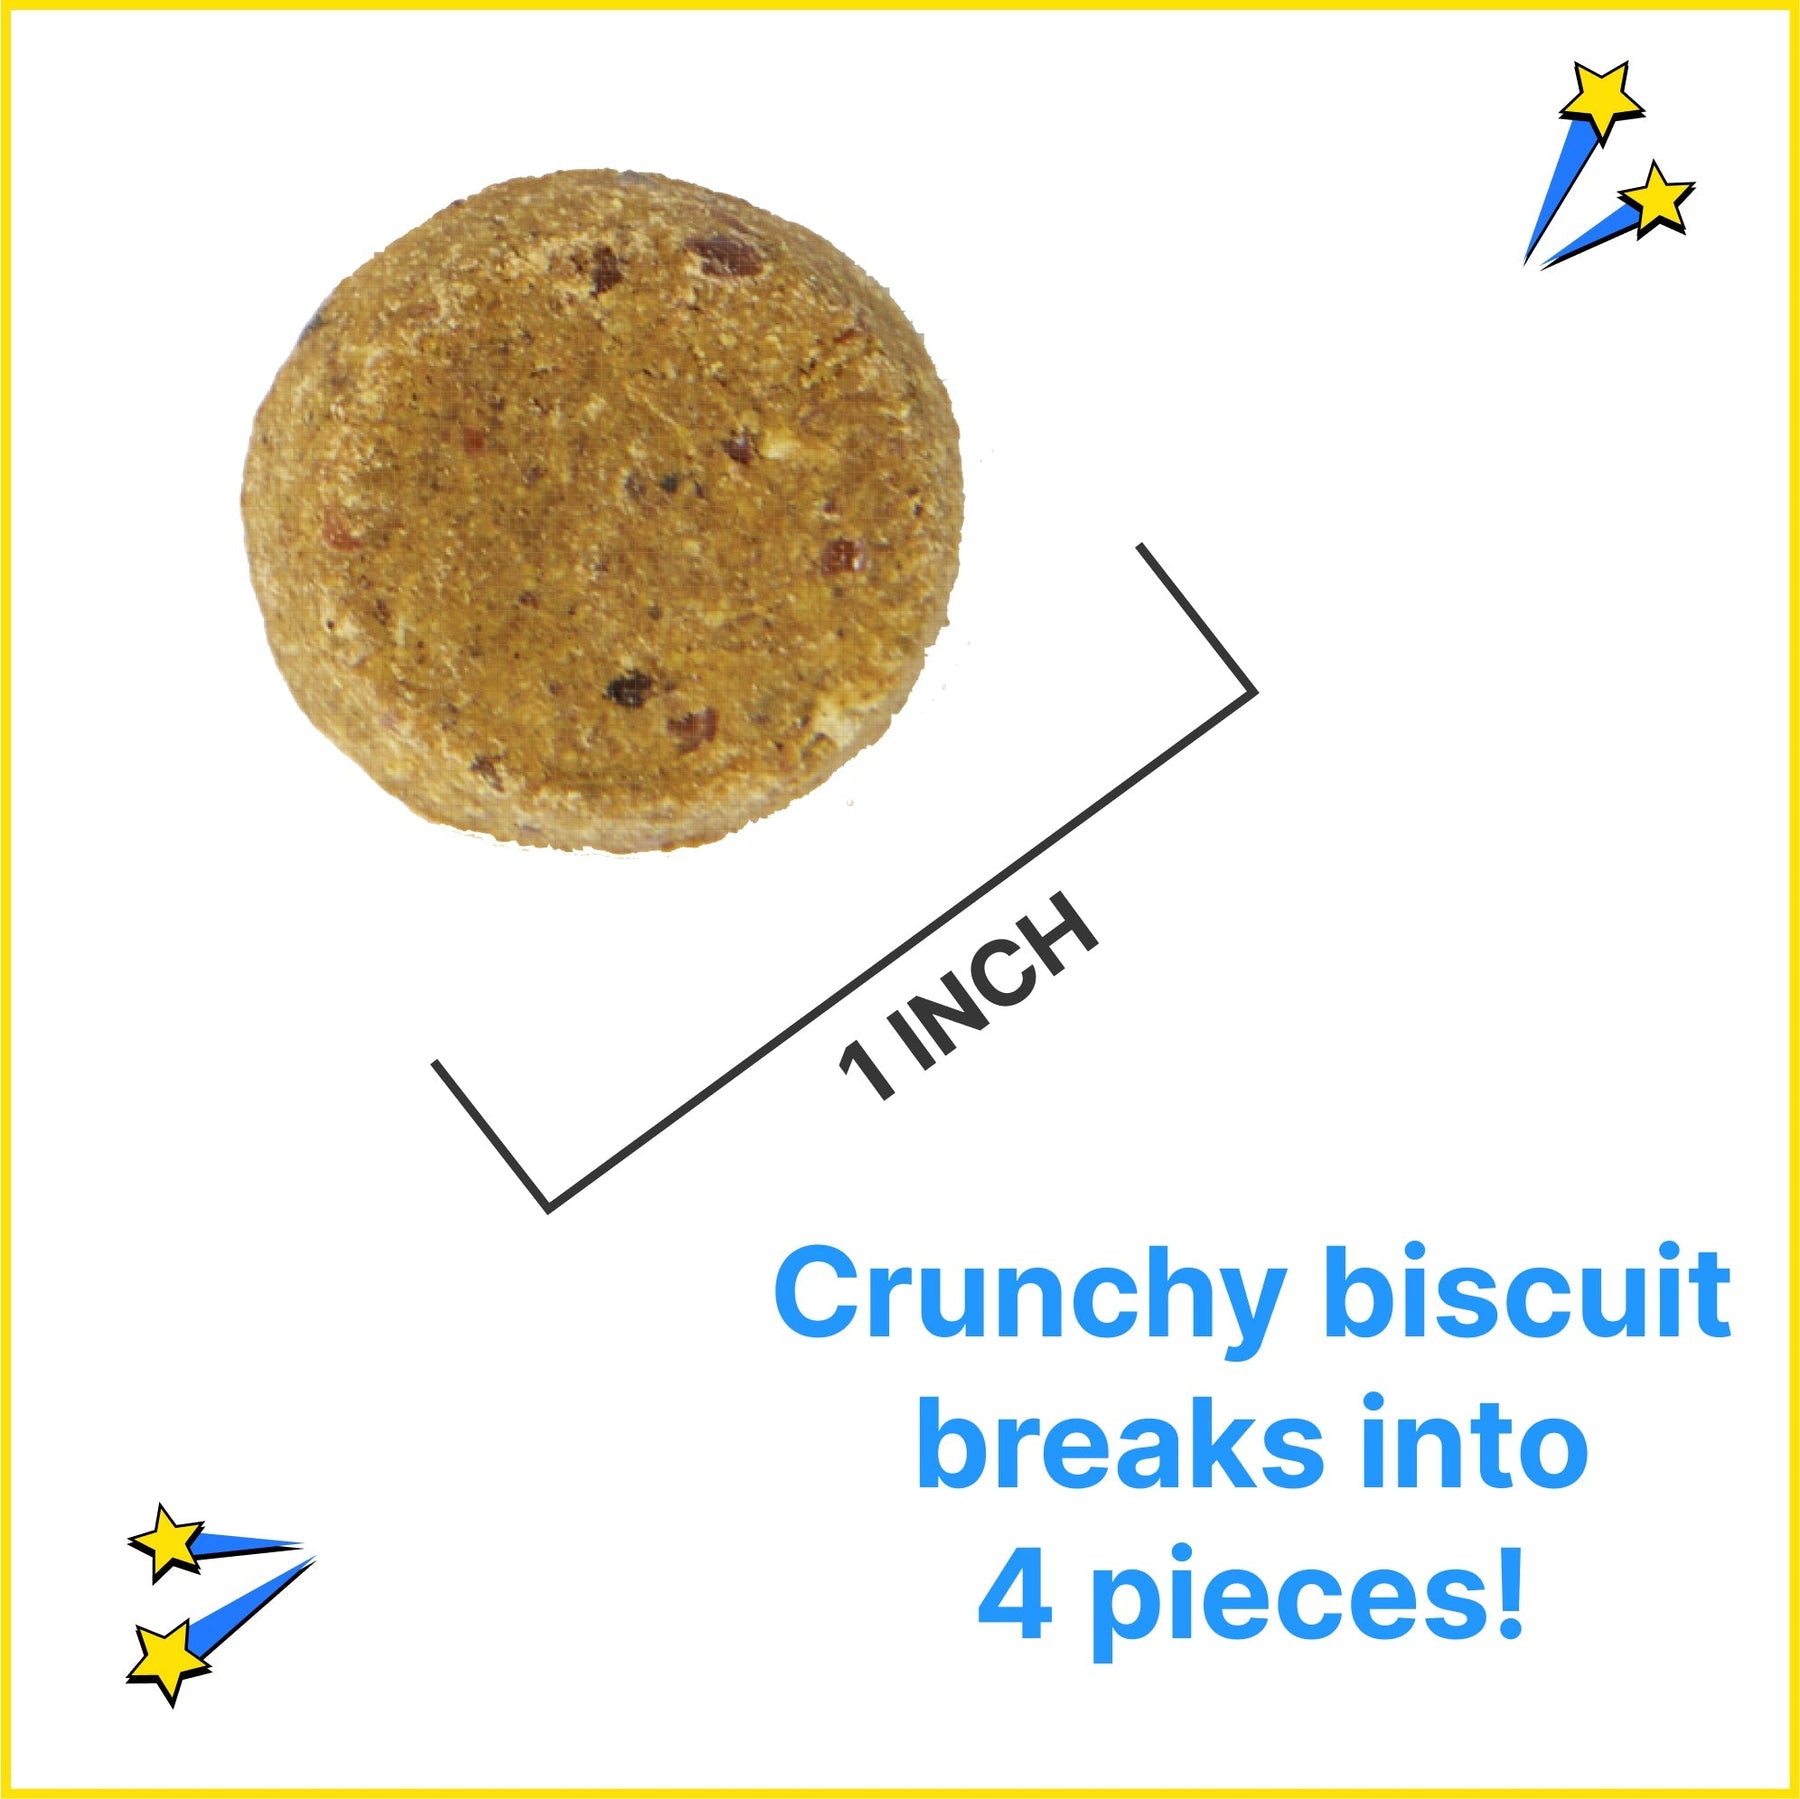 enlarged single treat displaying 1 inch size text